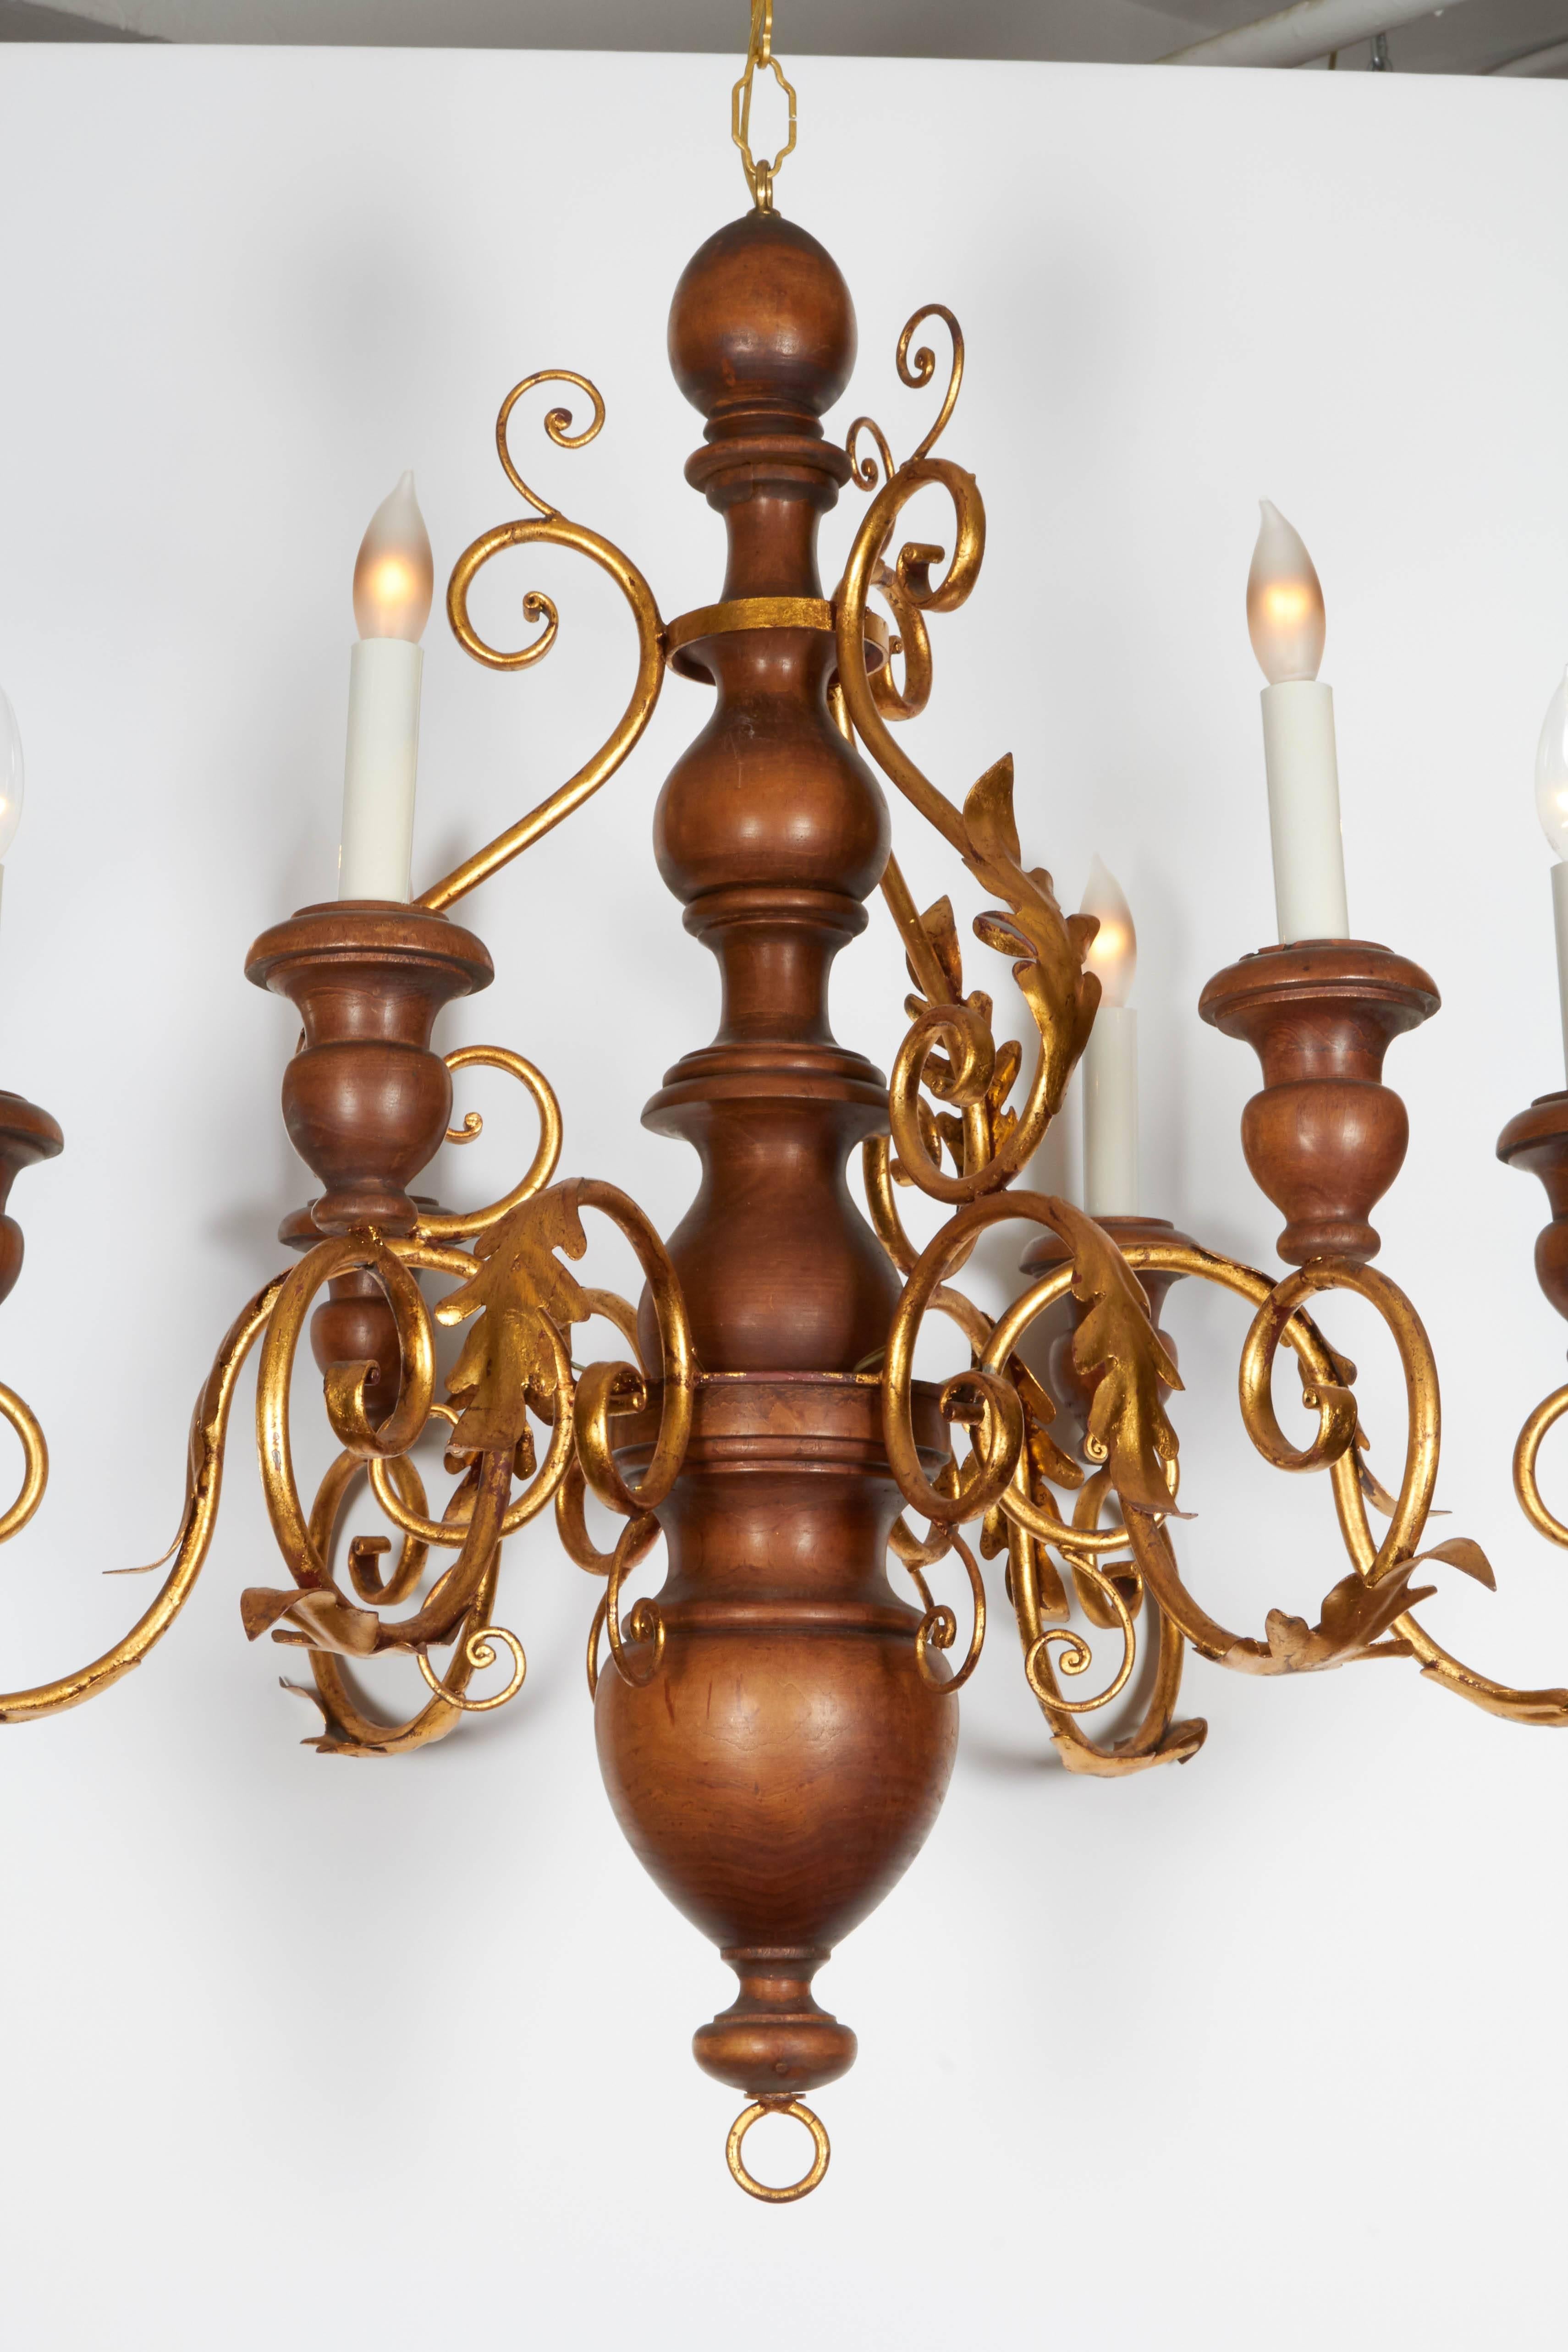 A Florentine six light chandelier, produced, circa 1950s, with turned, baluster form wood body and decorative bobeches, each with faux candle socket cover, and scrolling arms, accented with oak leaves, in gilded metal. Wiring and sockets to US